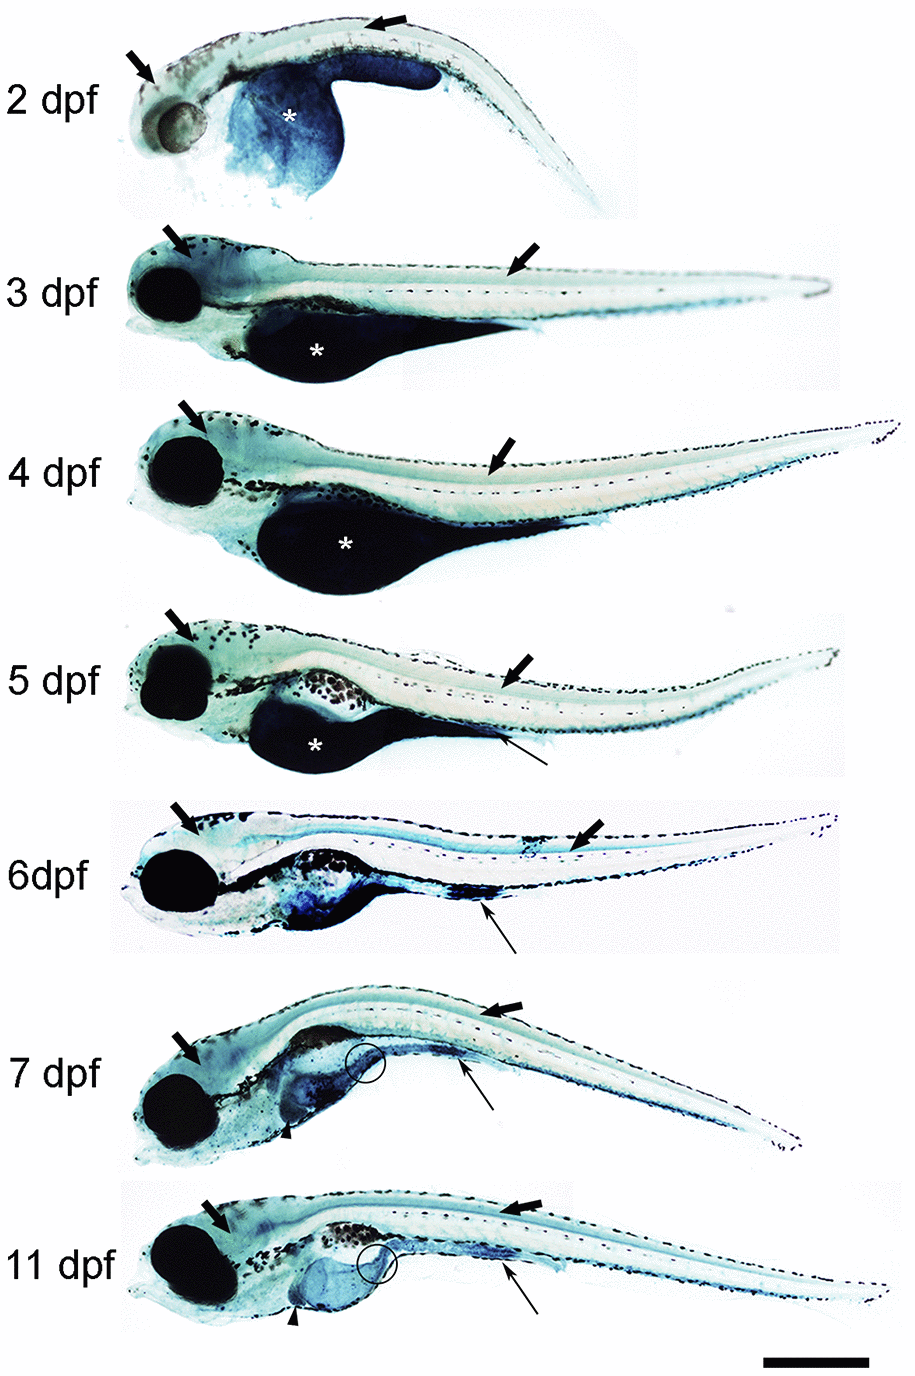 Photomicrographs of whole-mounted developing zebrafish showing the presence of SA–β–gal staining. Representative images of 2, 3, 4, 5, 6, 7 and 11 dpf zebrafish are shown. The asterisks indicate the presence of intense SA–β–gal staining in the yolk. Thin arrows indicate the presence of intense SA–β–gal staining in the caudal (cloacal) end of the intestine. Thick black arrows indicate the presence of SA–β–gal staining in the brain. Thick empty arrows indicate the presence of SA–β–gal staining in the spinal cord. Arrowheads indicate the presence of SA–β–gal staining in the liver. Circles indicate the presence of SA–β–gal staining in the oesophagus. Scale bar: 200 μm. Images are a composition of different pictures taken under the microscope overlapped together and modified using the same parameters.